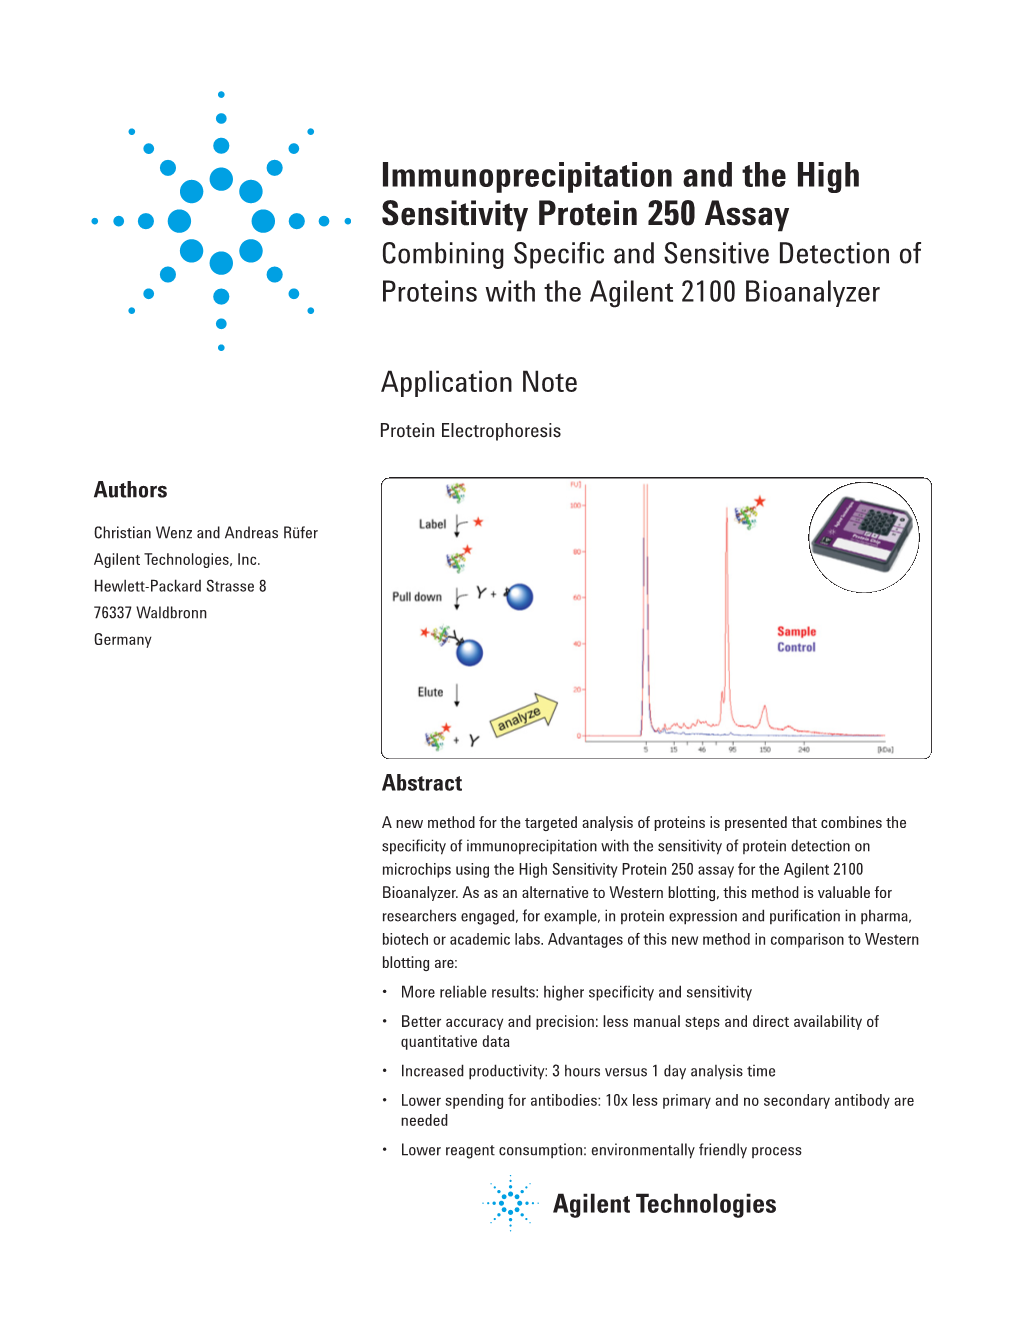 Immunoprecipitation and the High Sensitivity Protein 250 Assay Combining Specific and Sensitive Detection of Proteins with the Agilent 2100 Bioanalyzer